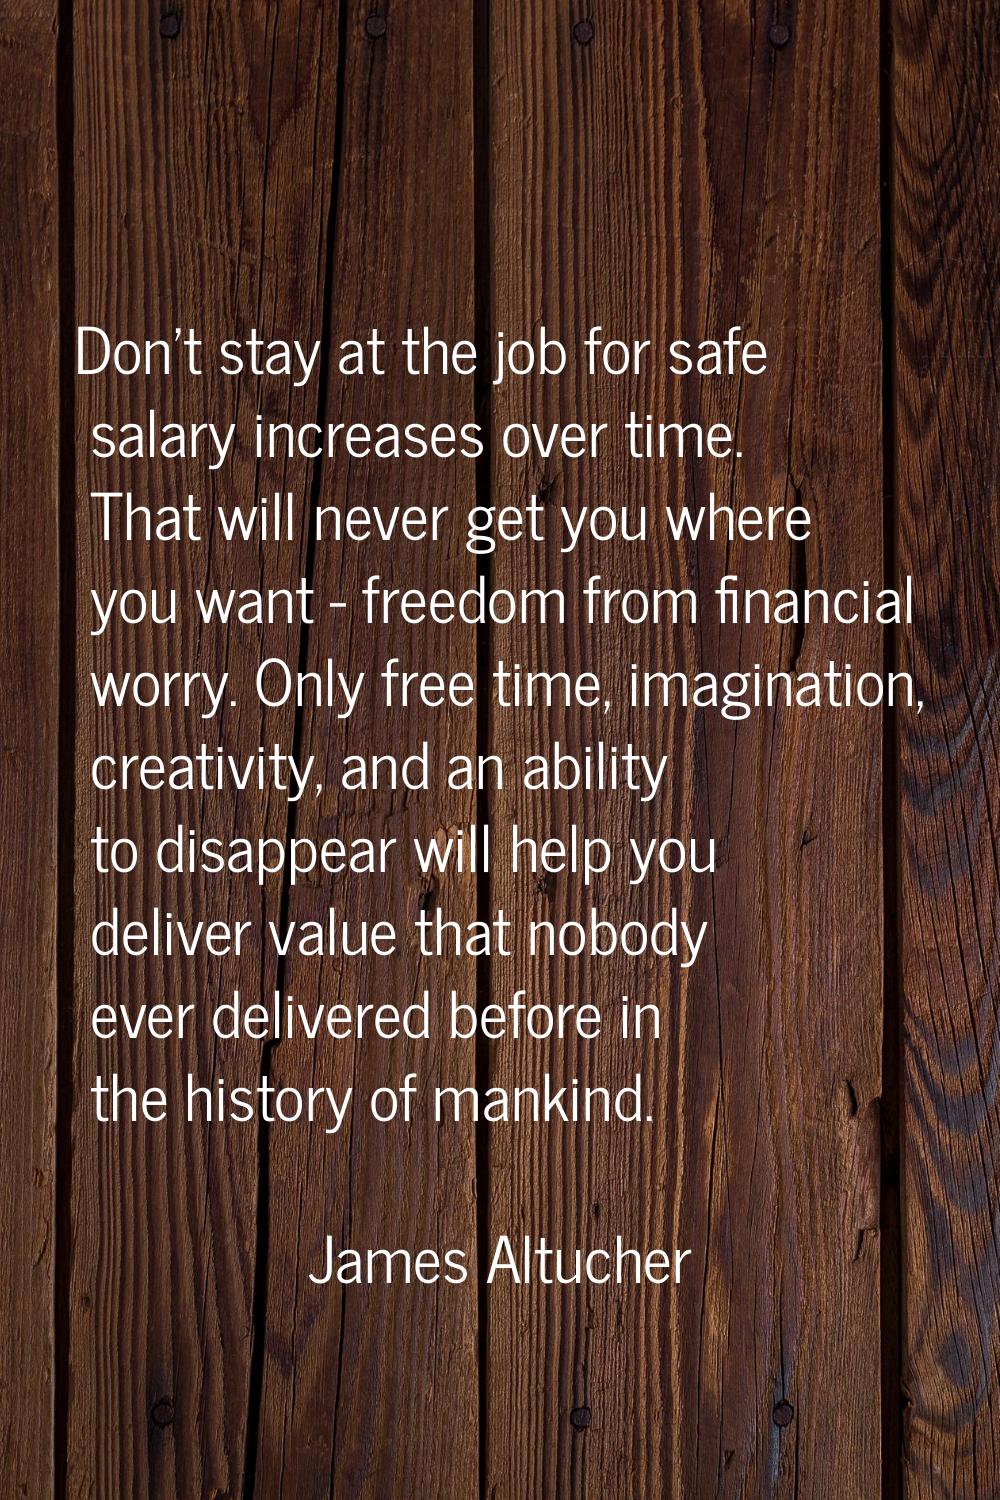 Don't stay at the job for safe salary increases over time. That will never get you where you want -